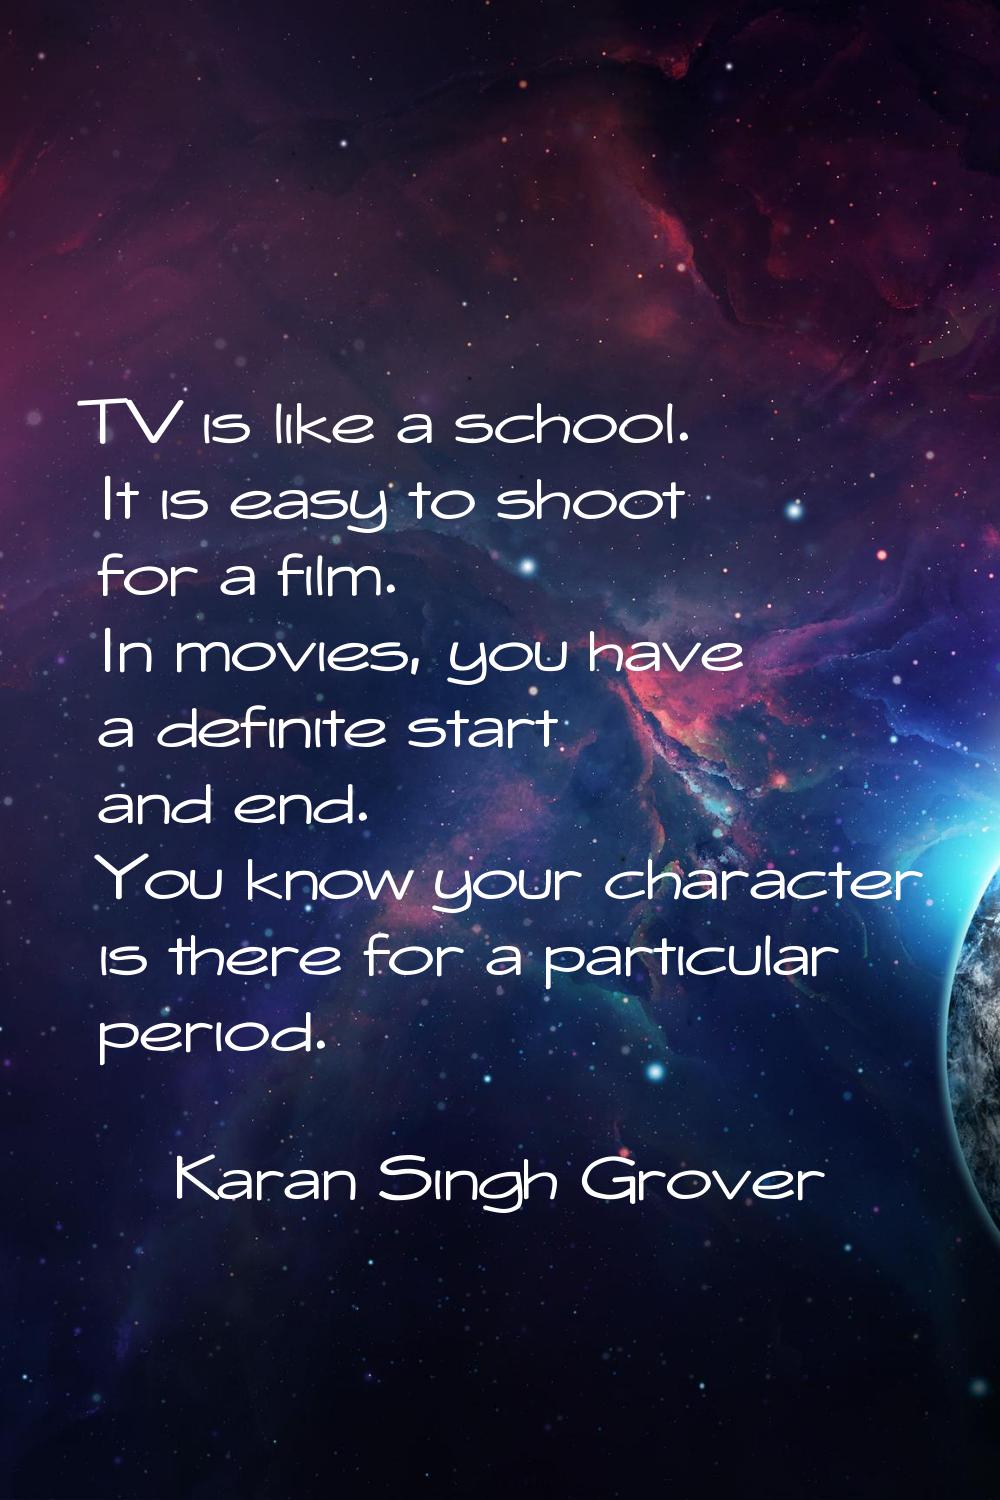 TV is like a school. It is easy to shoot for a film. In movies, you have a definite start and end. 